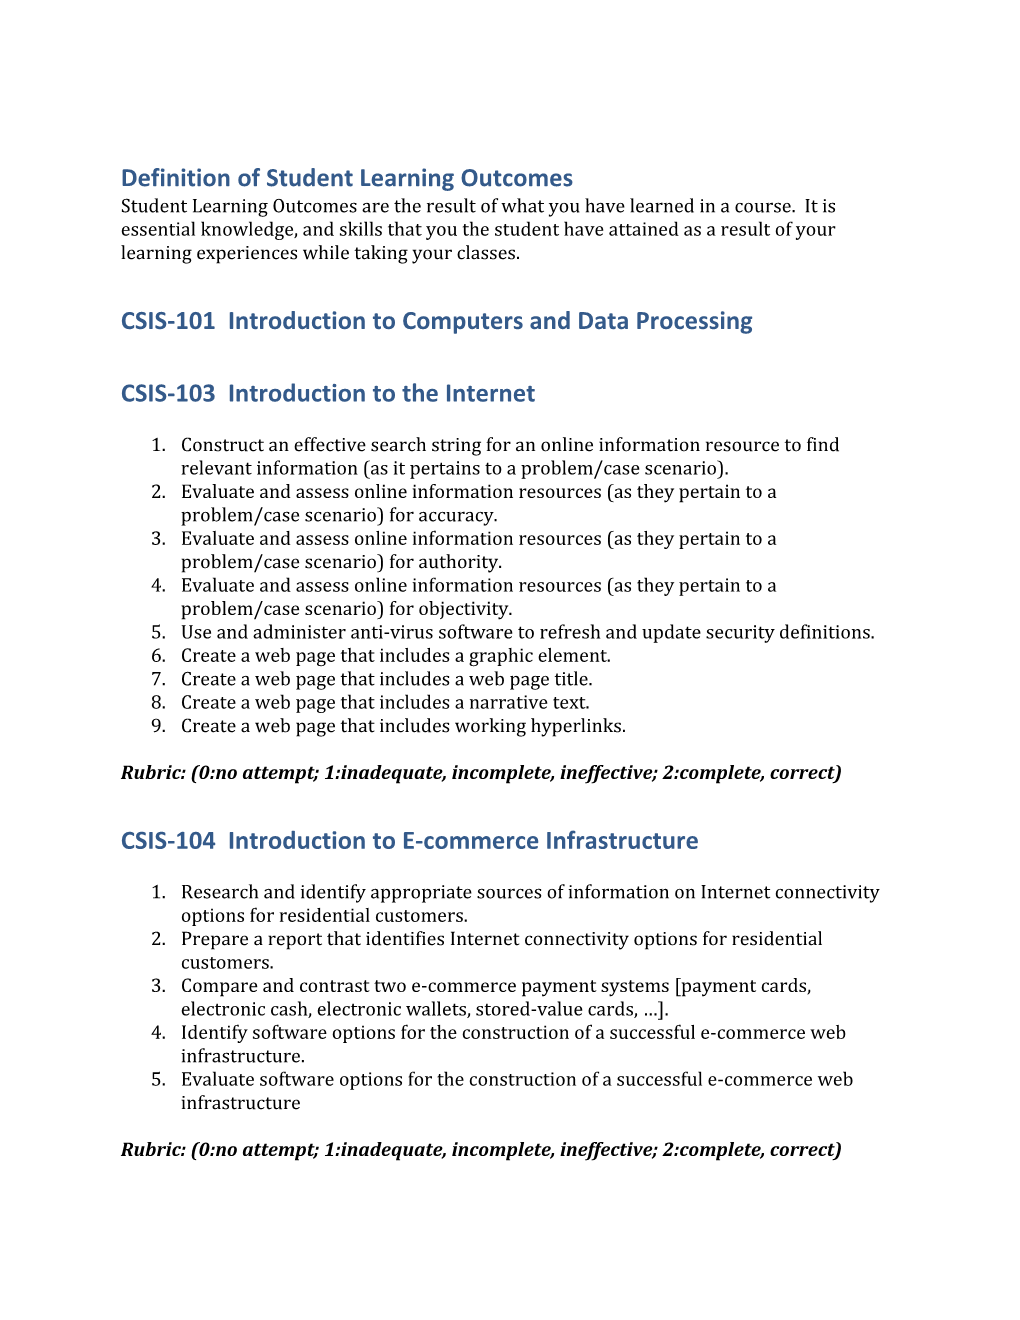 Definition of Student Learning Outcomes